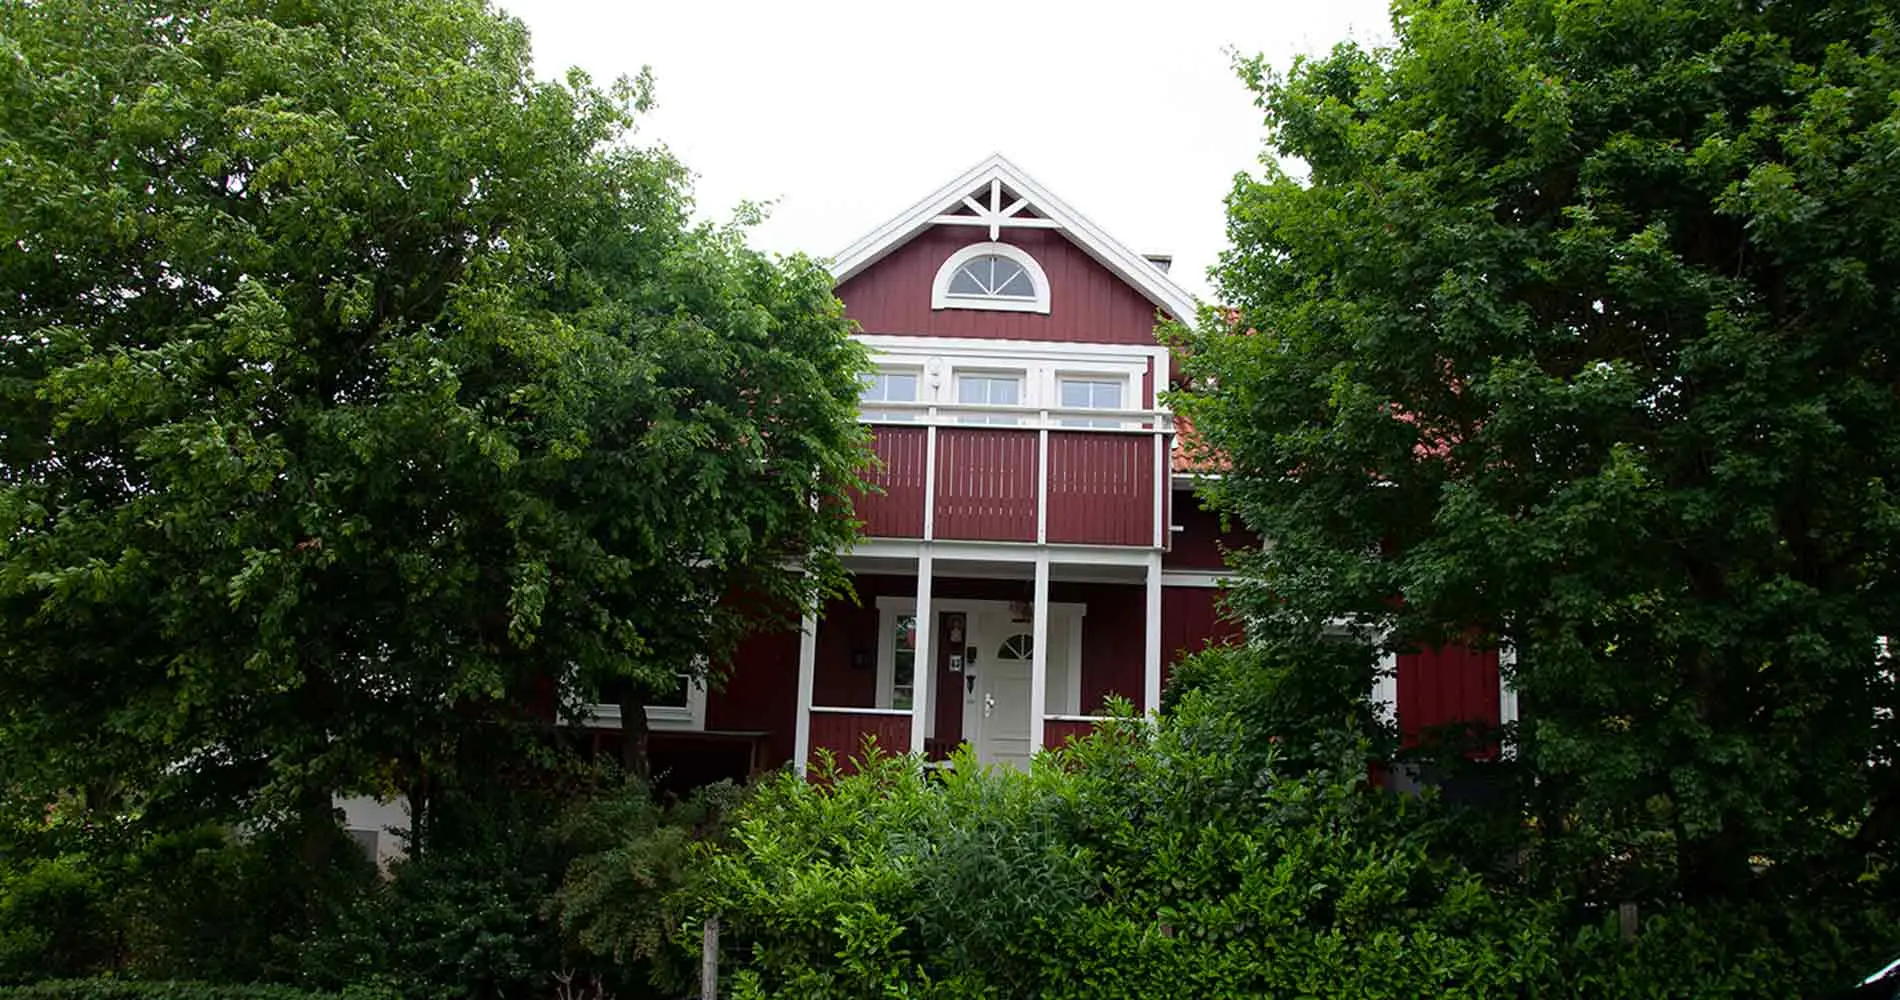 A house with its front door, a balcony above it and the gable peeks out between two even larger trees. More bushes can be seen in the foreground.